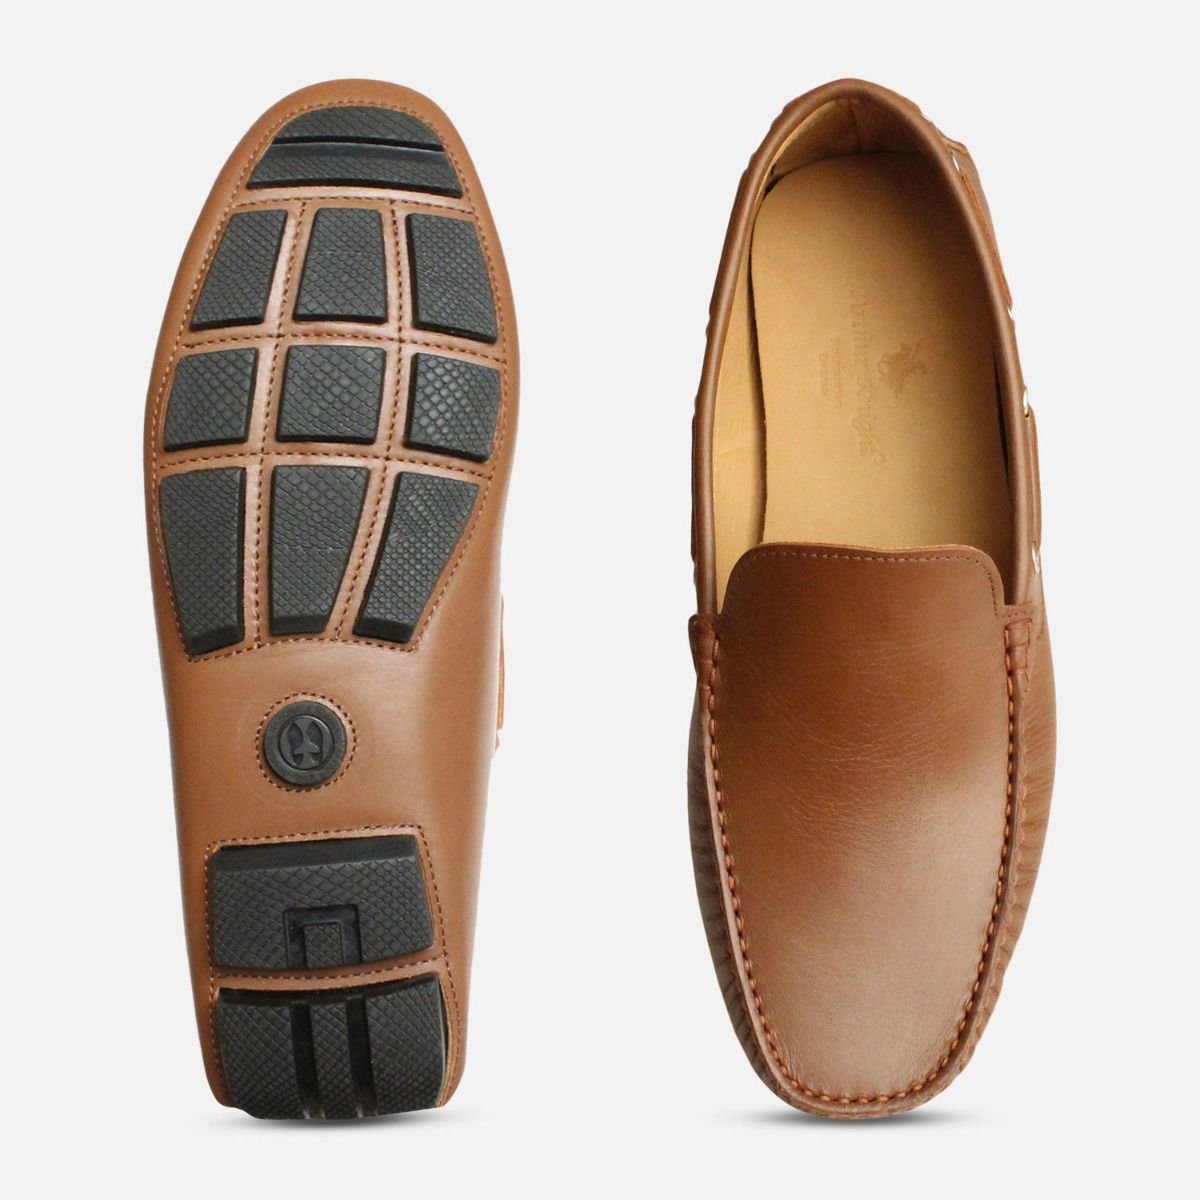 italian moccasin shoes